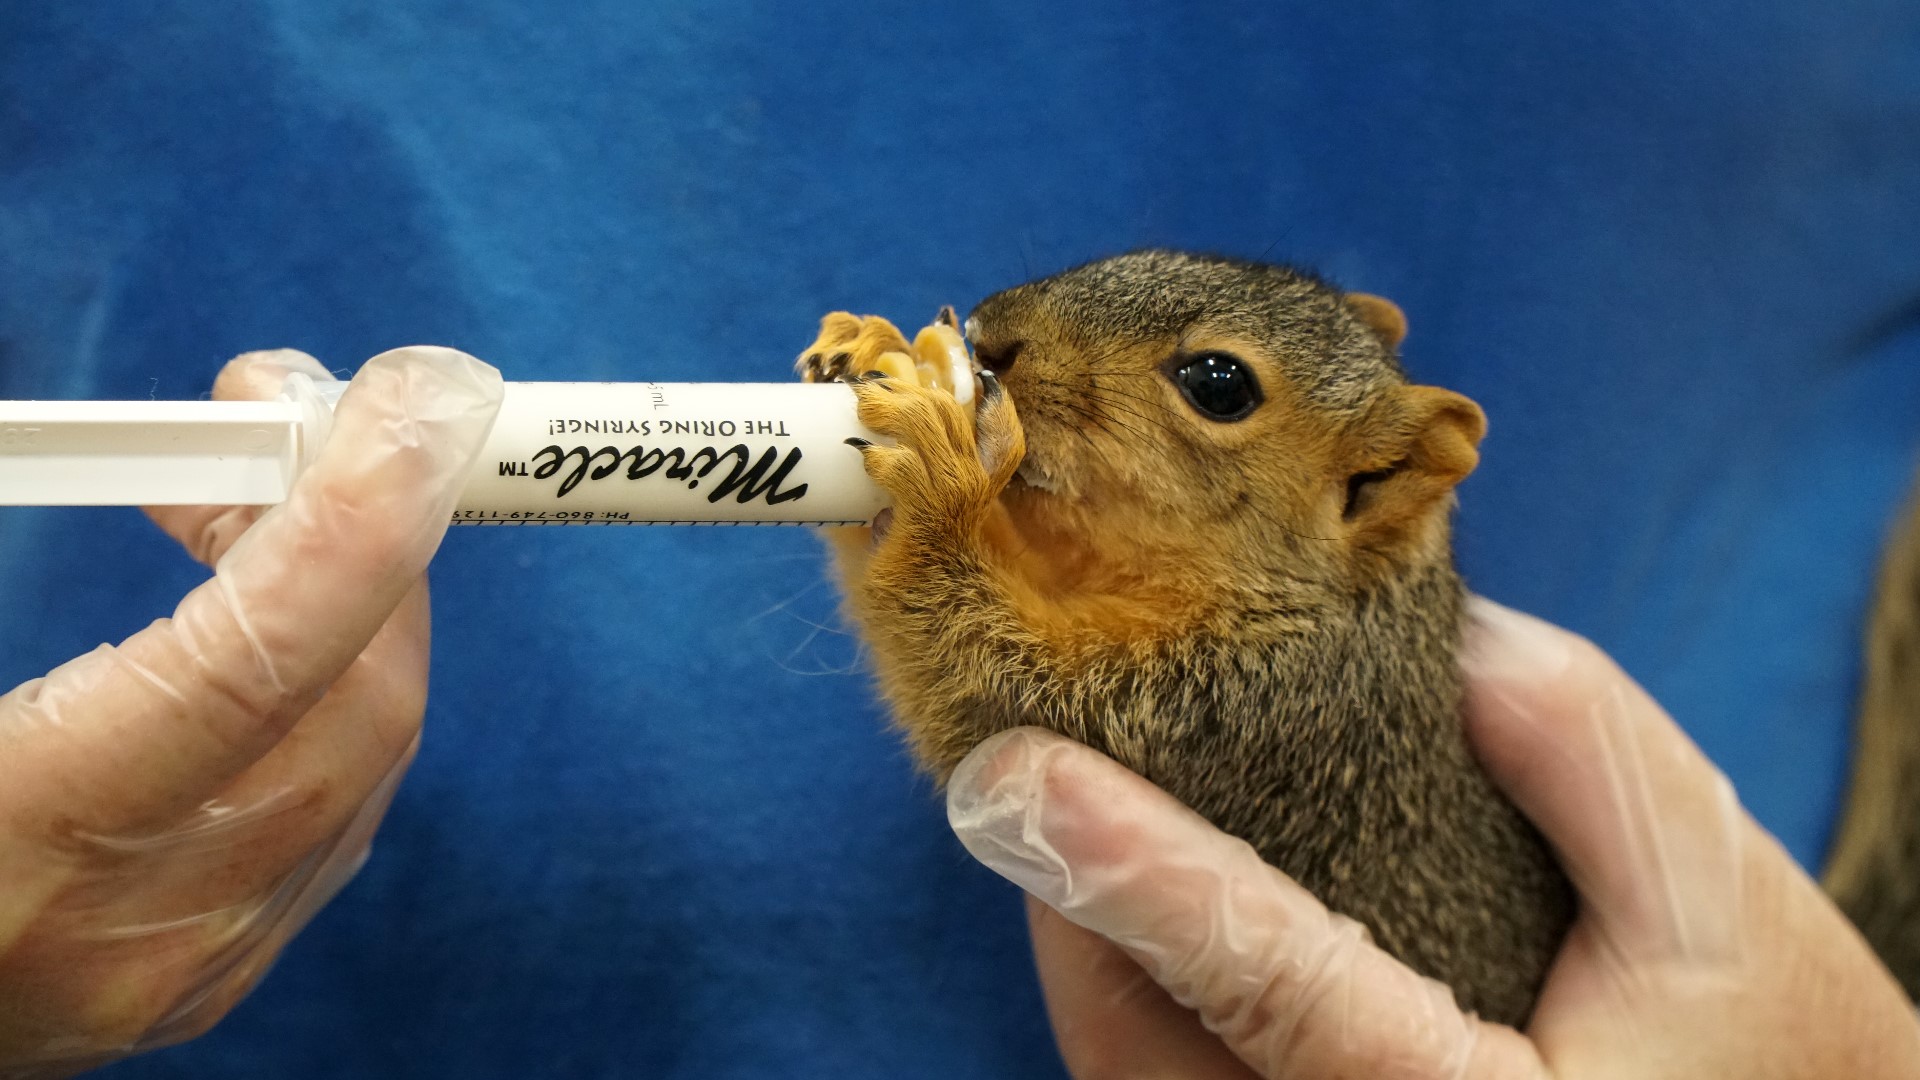 Squirrels play a pivotal role in biodiversity, water storage, and a delicate food chain.